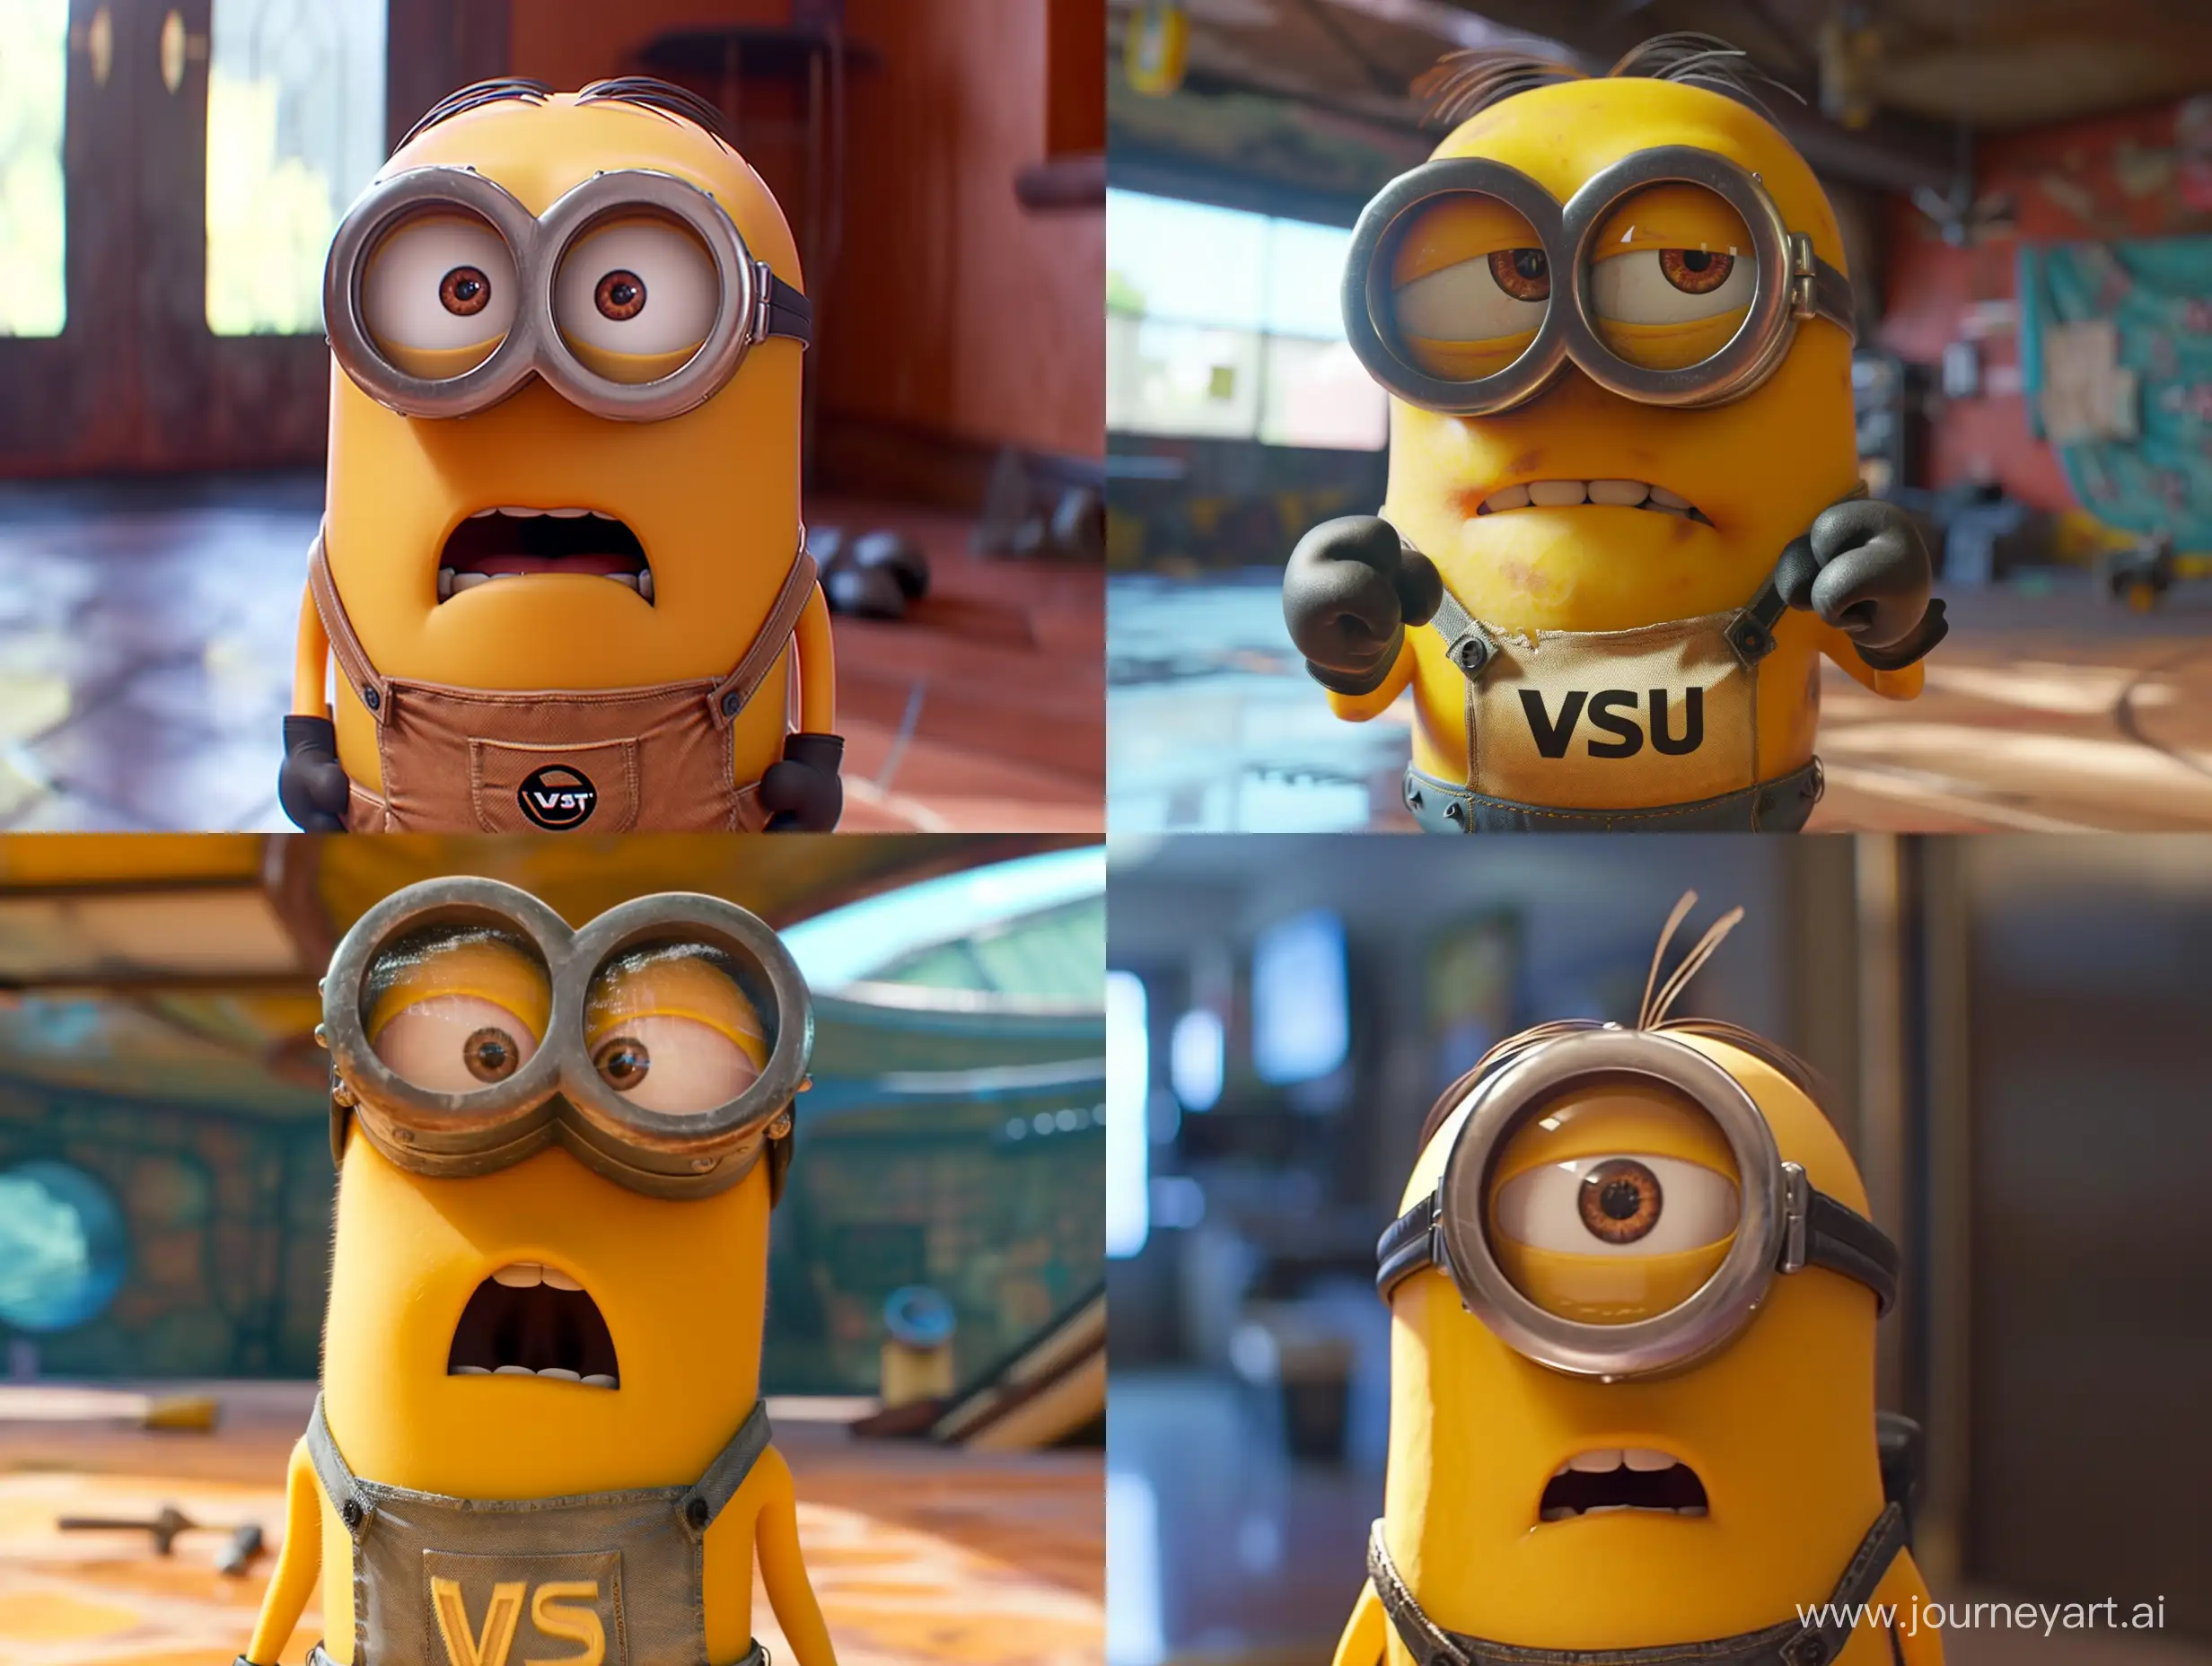 Adorable-Minion-with-VSU-Tshirt-Playful-and-Cute-Character-Image